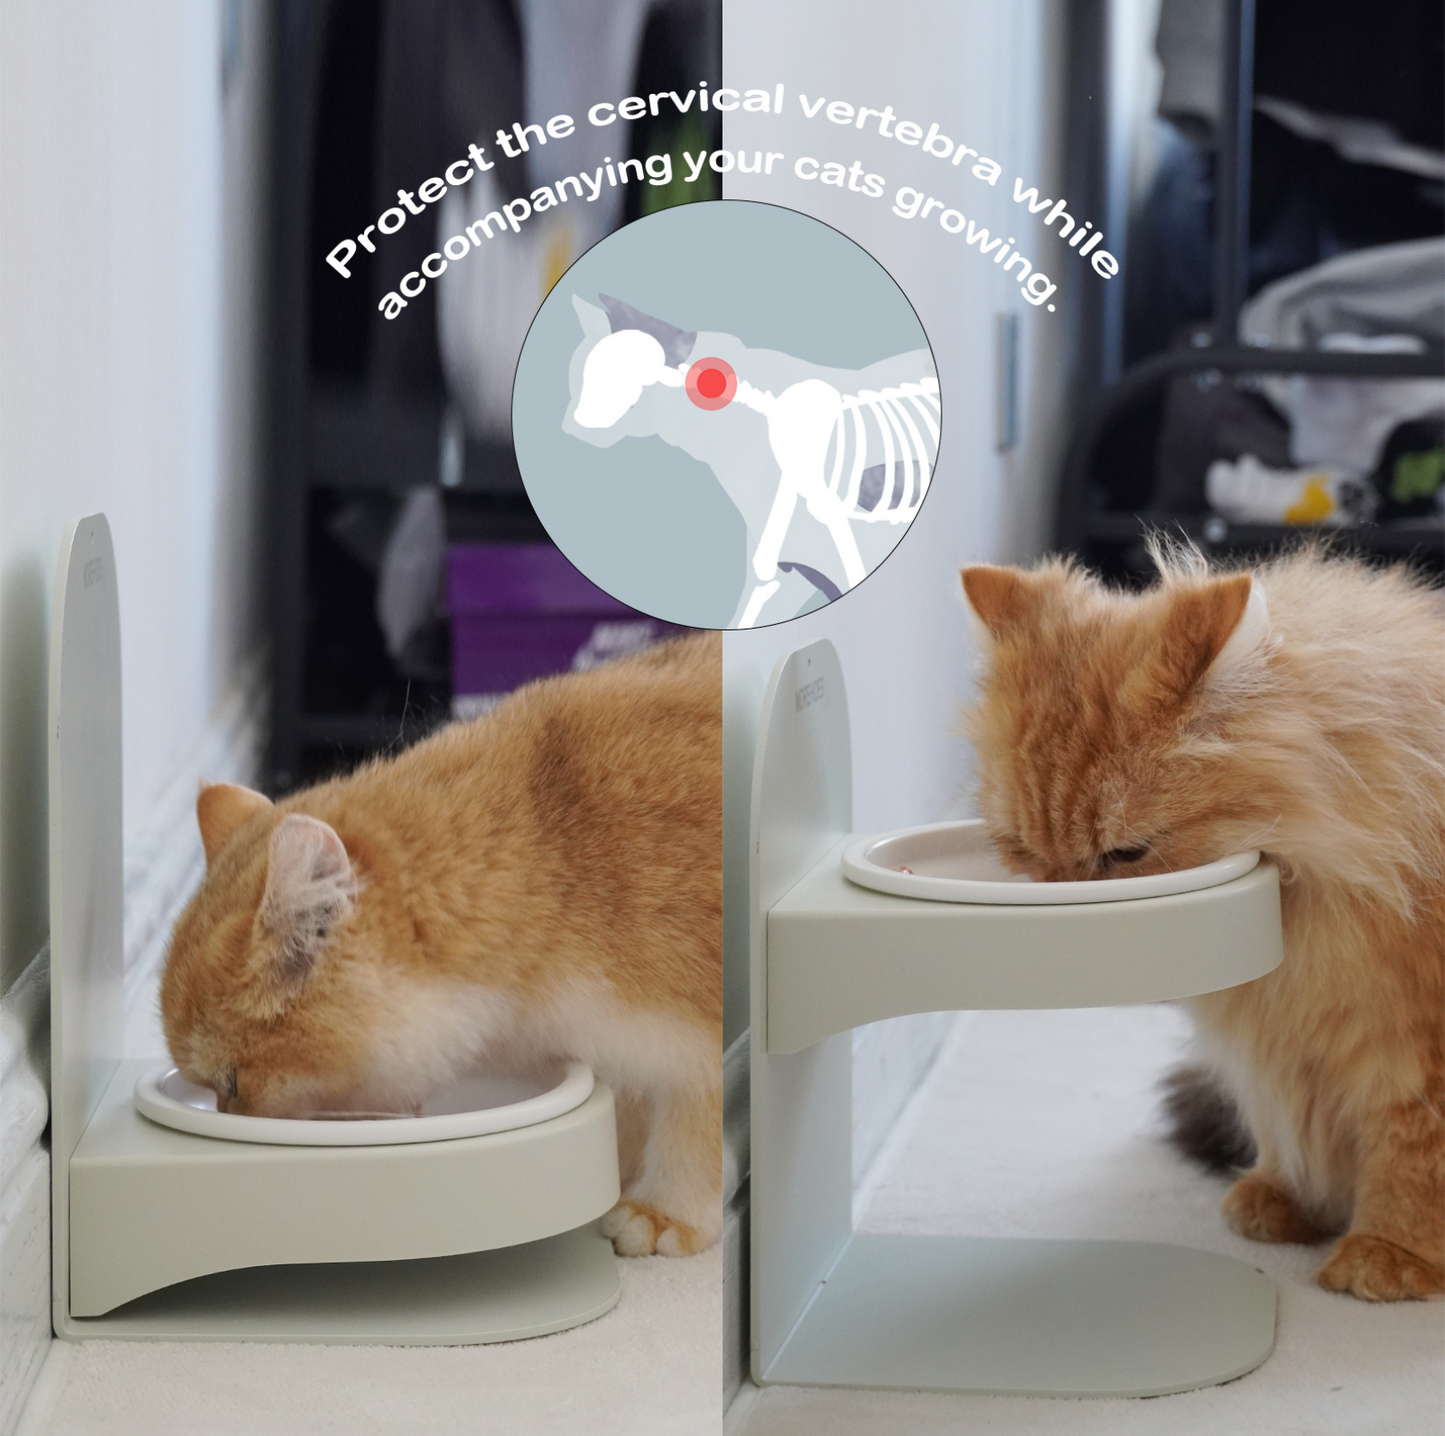 Adjustable Magnetic Cat Bowl Set - Durable and Versatile Feeding Solution